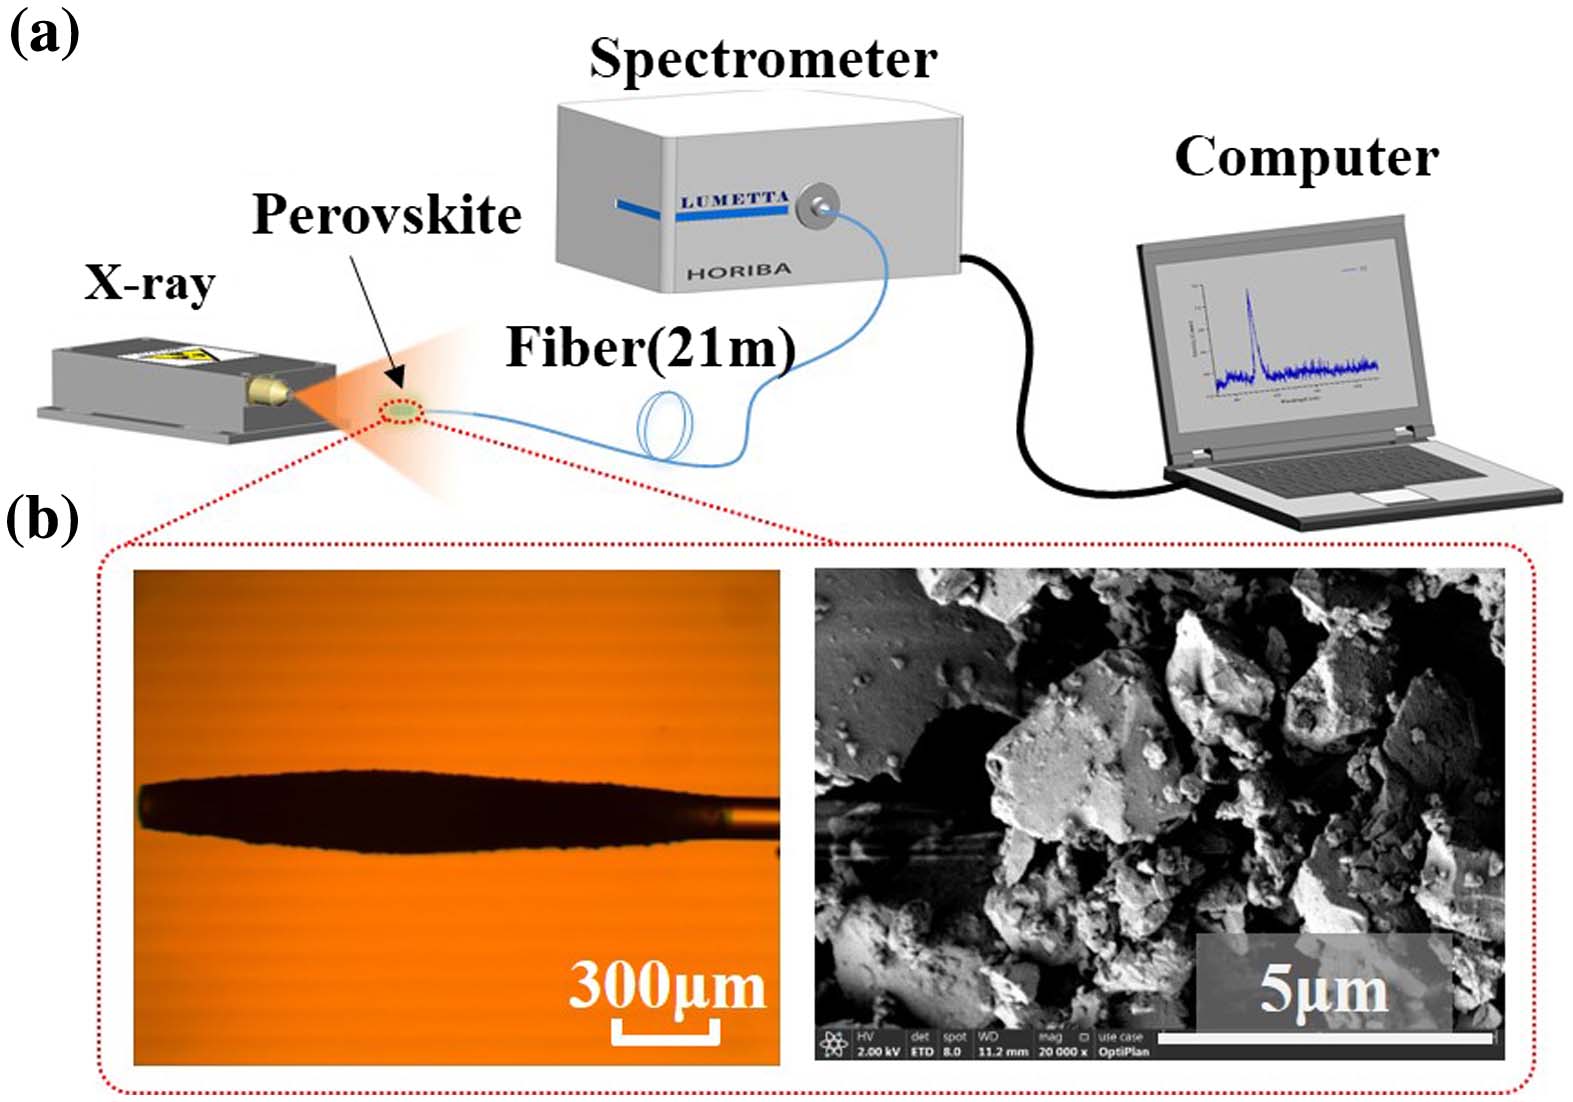 (a) Schematic diagram of the proposed X-ray detection set-up. (b) Microscopic image of the fiber head covered by PQDs embedded glass powders (left) and scanning electron microscope image of the glass powders (right).